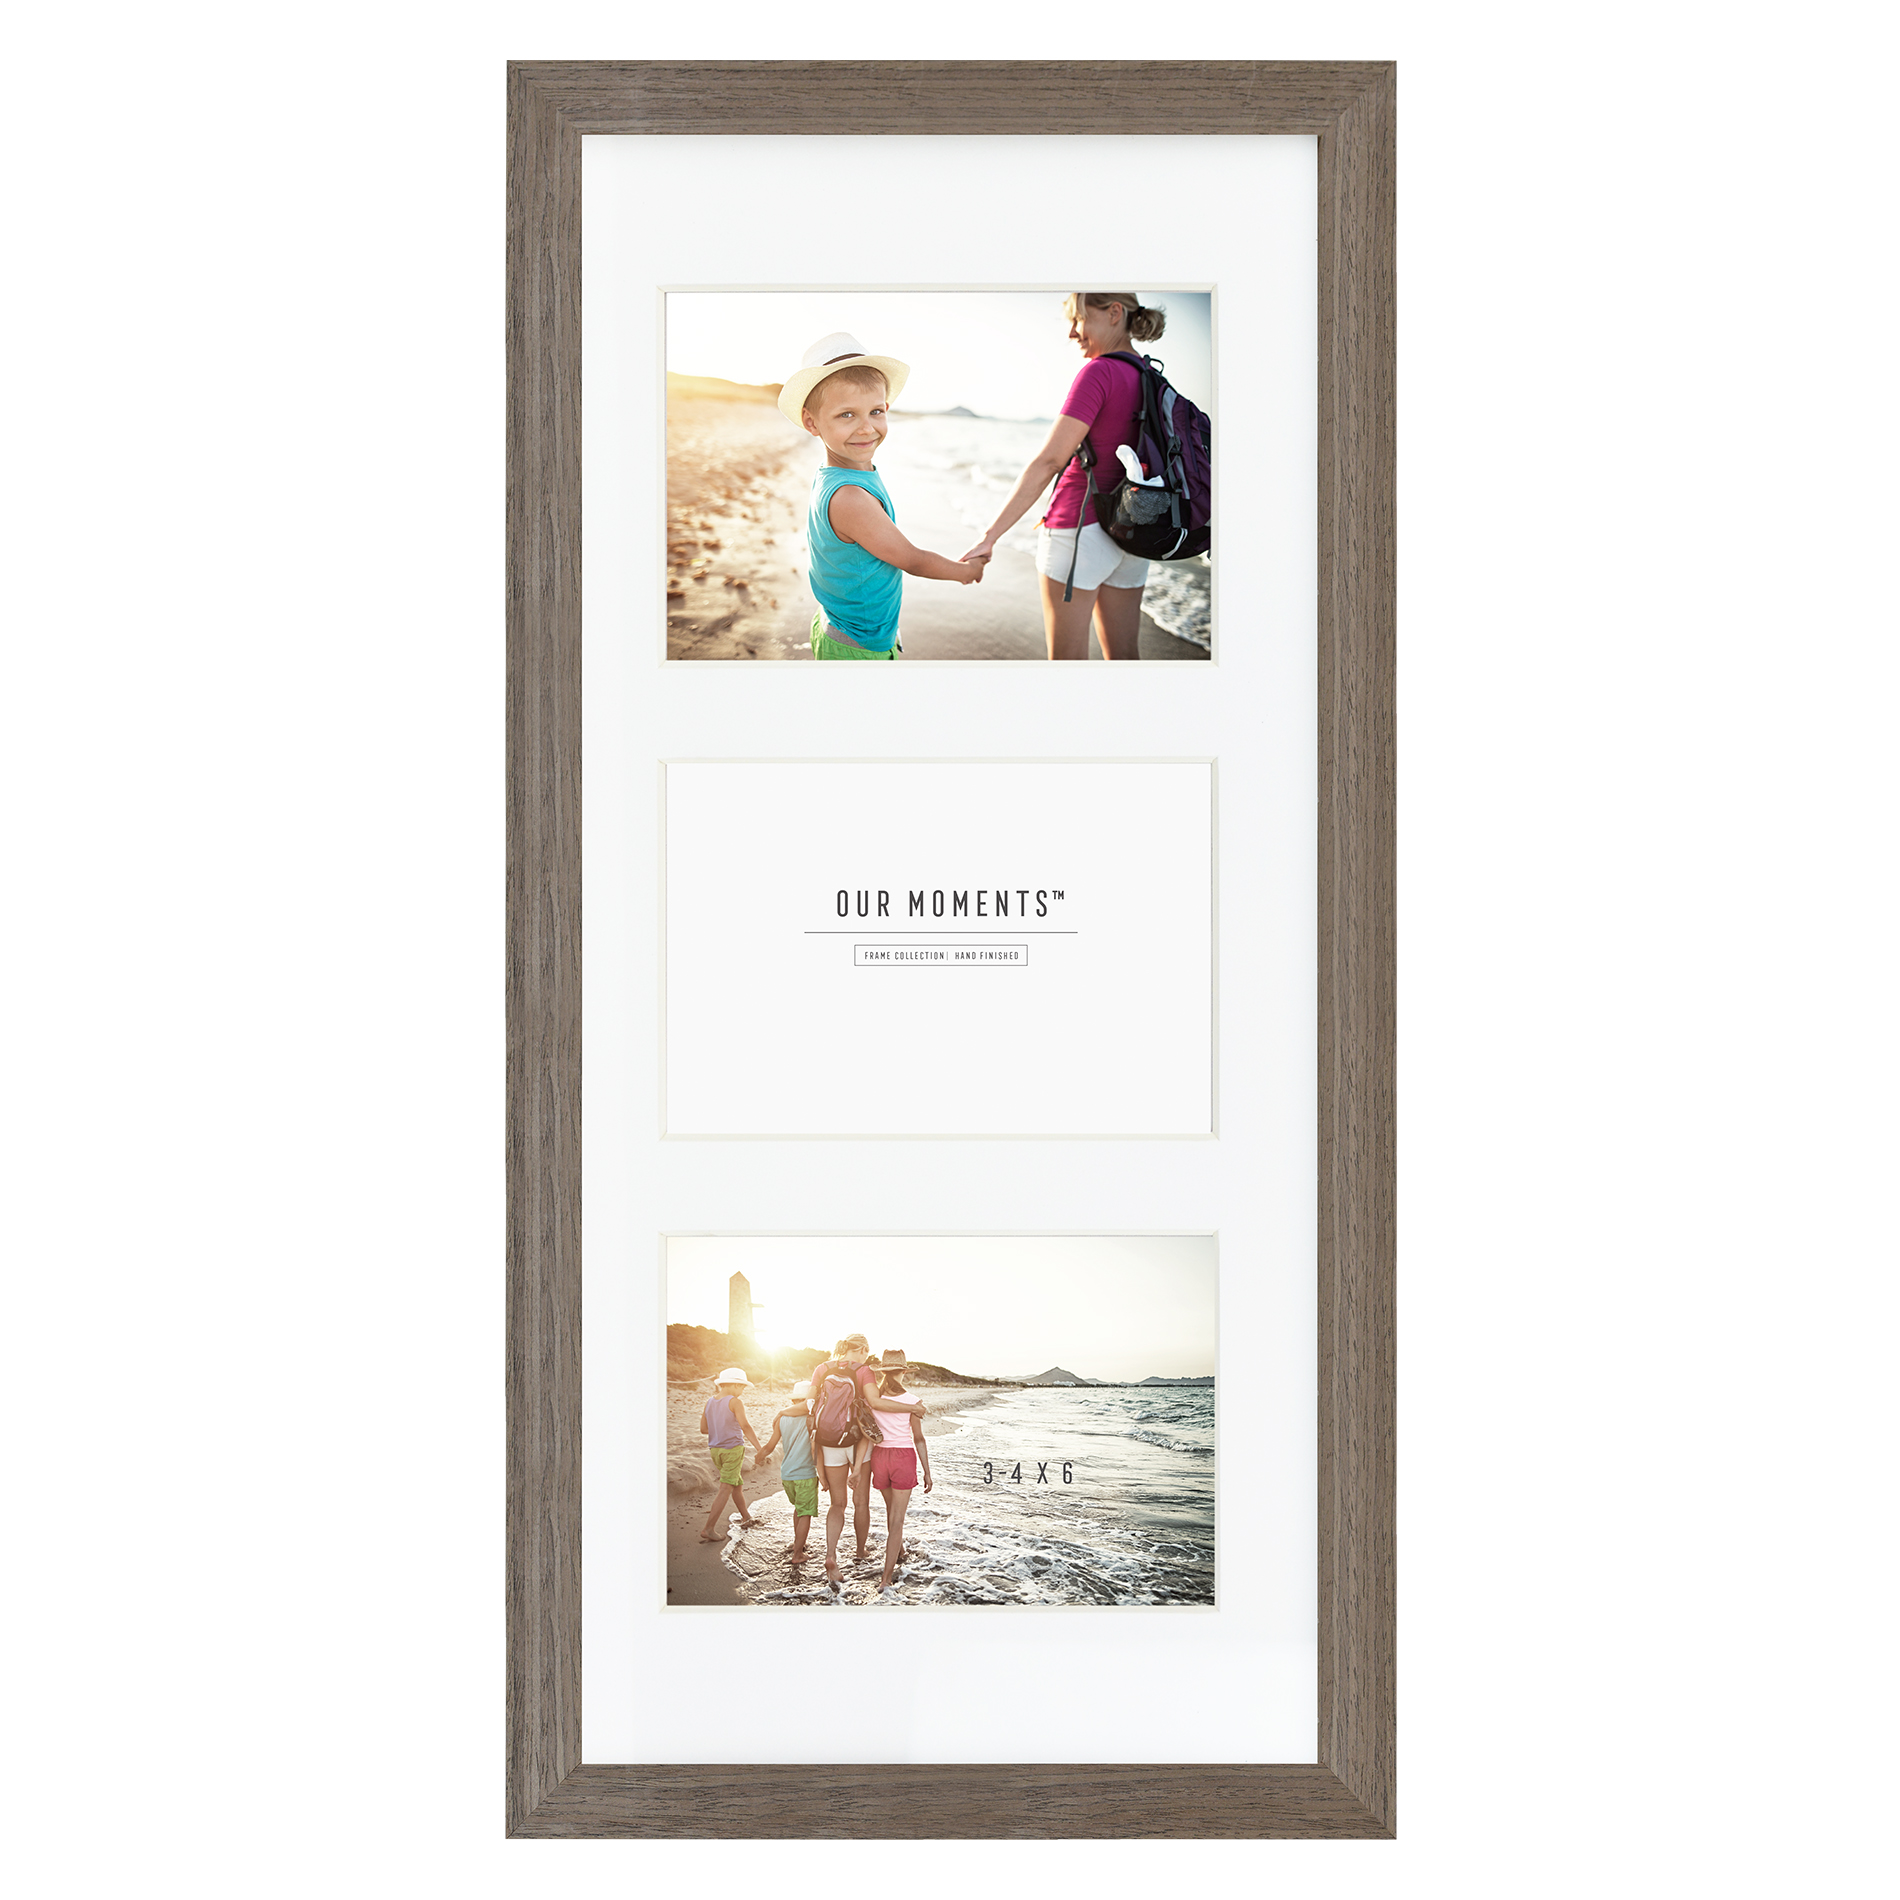 4&#8221; x 6&#8221; Three-Opening Picture Frame - Tan